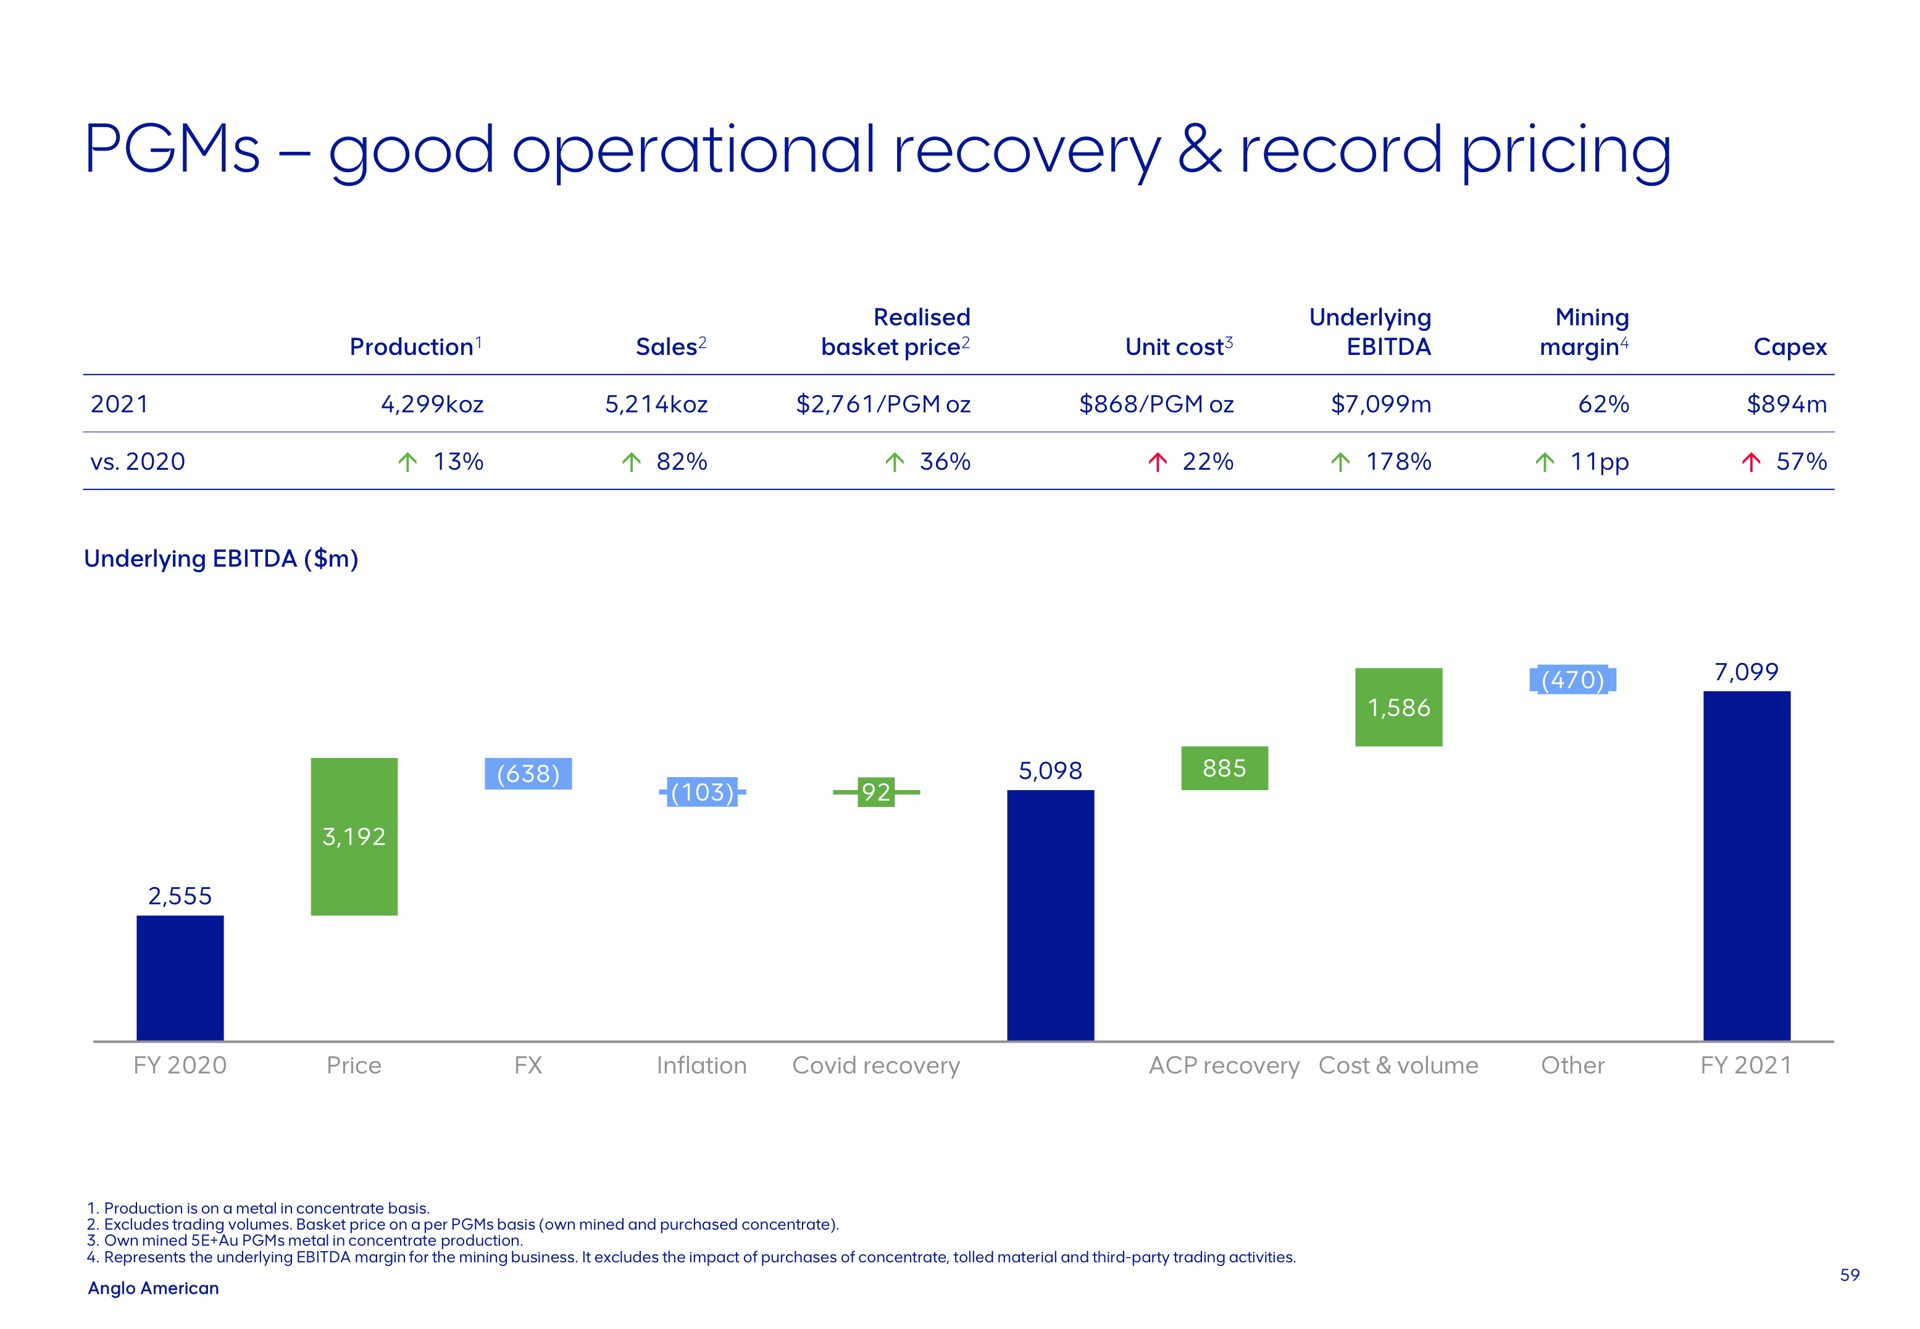 good operational recovery record pricing | AngloAmerican